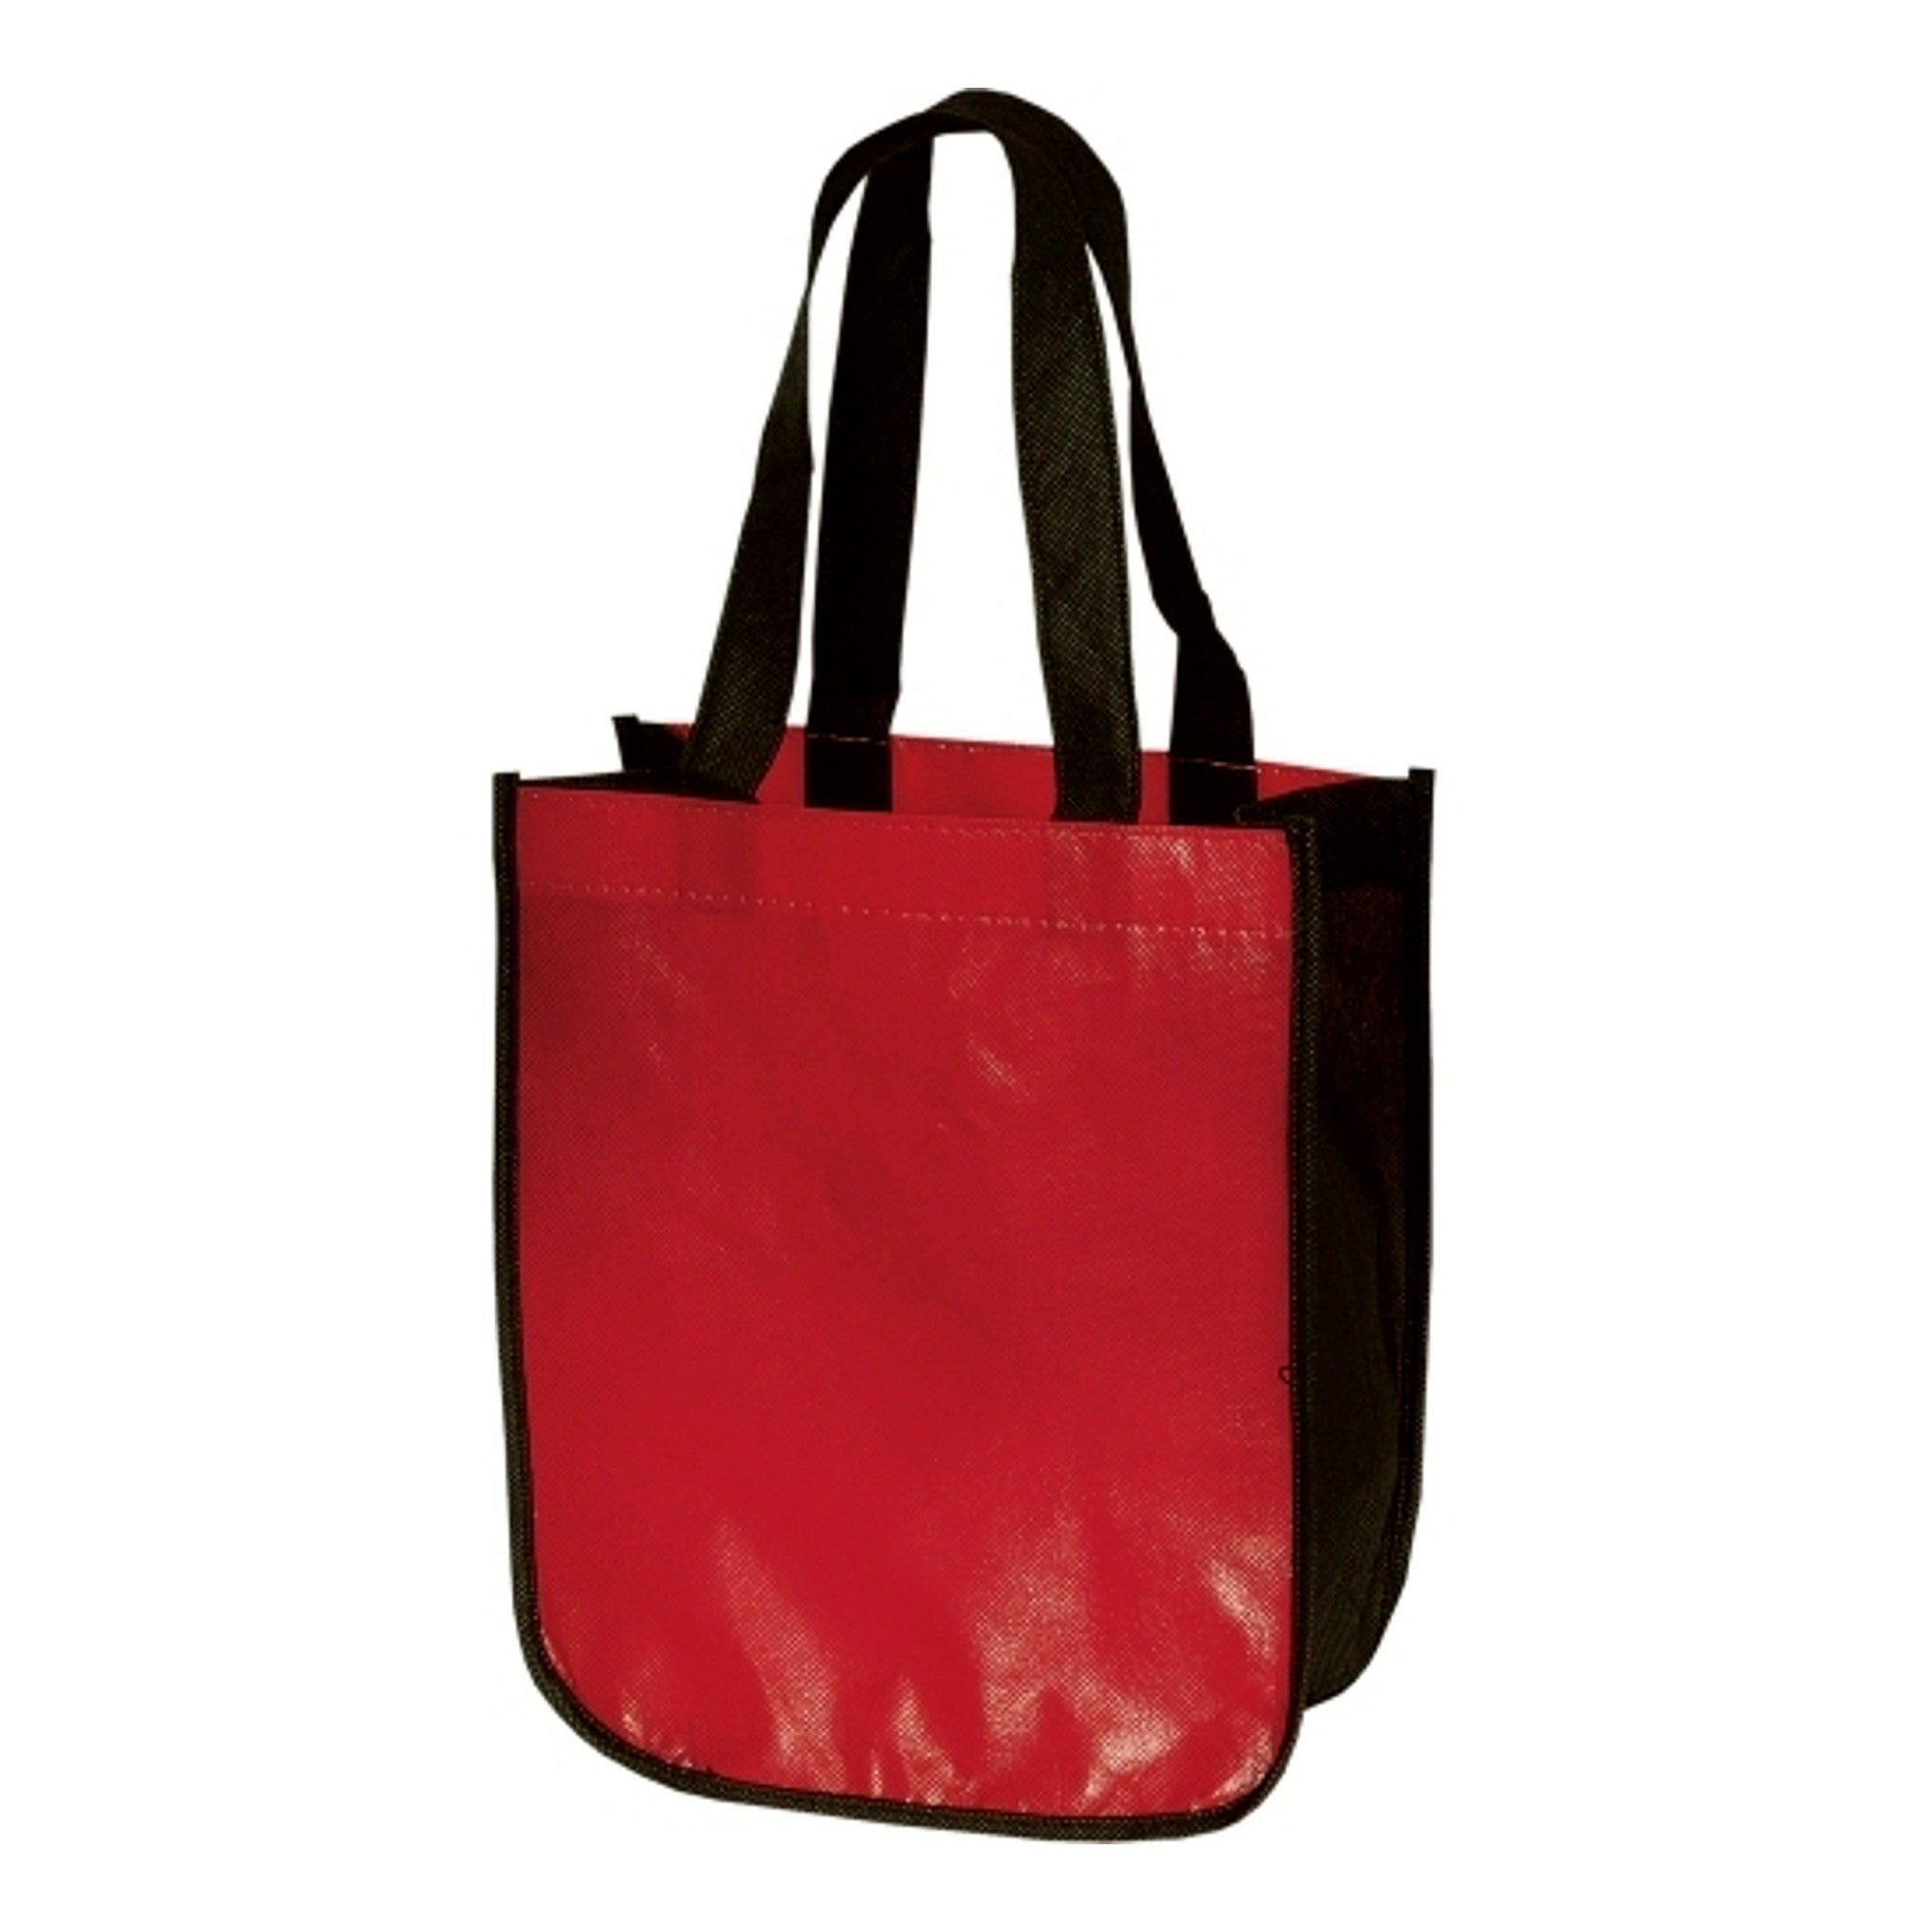 Customized Travel Tote Bag with Hook and Loop Closure - Personalized Tote Bags with Your Logo - BS171, Red / 1-Color / Front by Tote Bag Factory